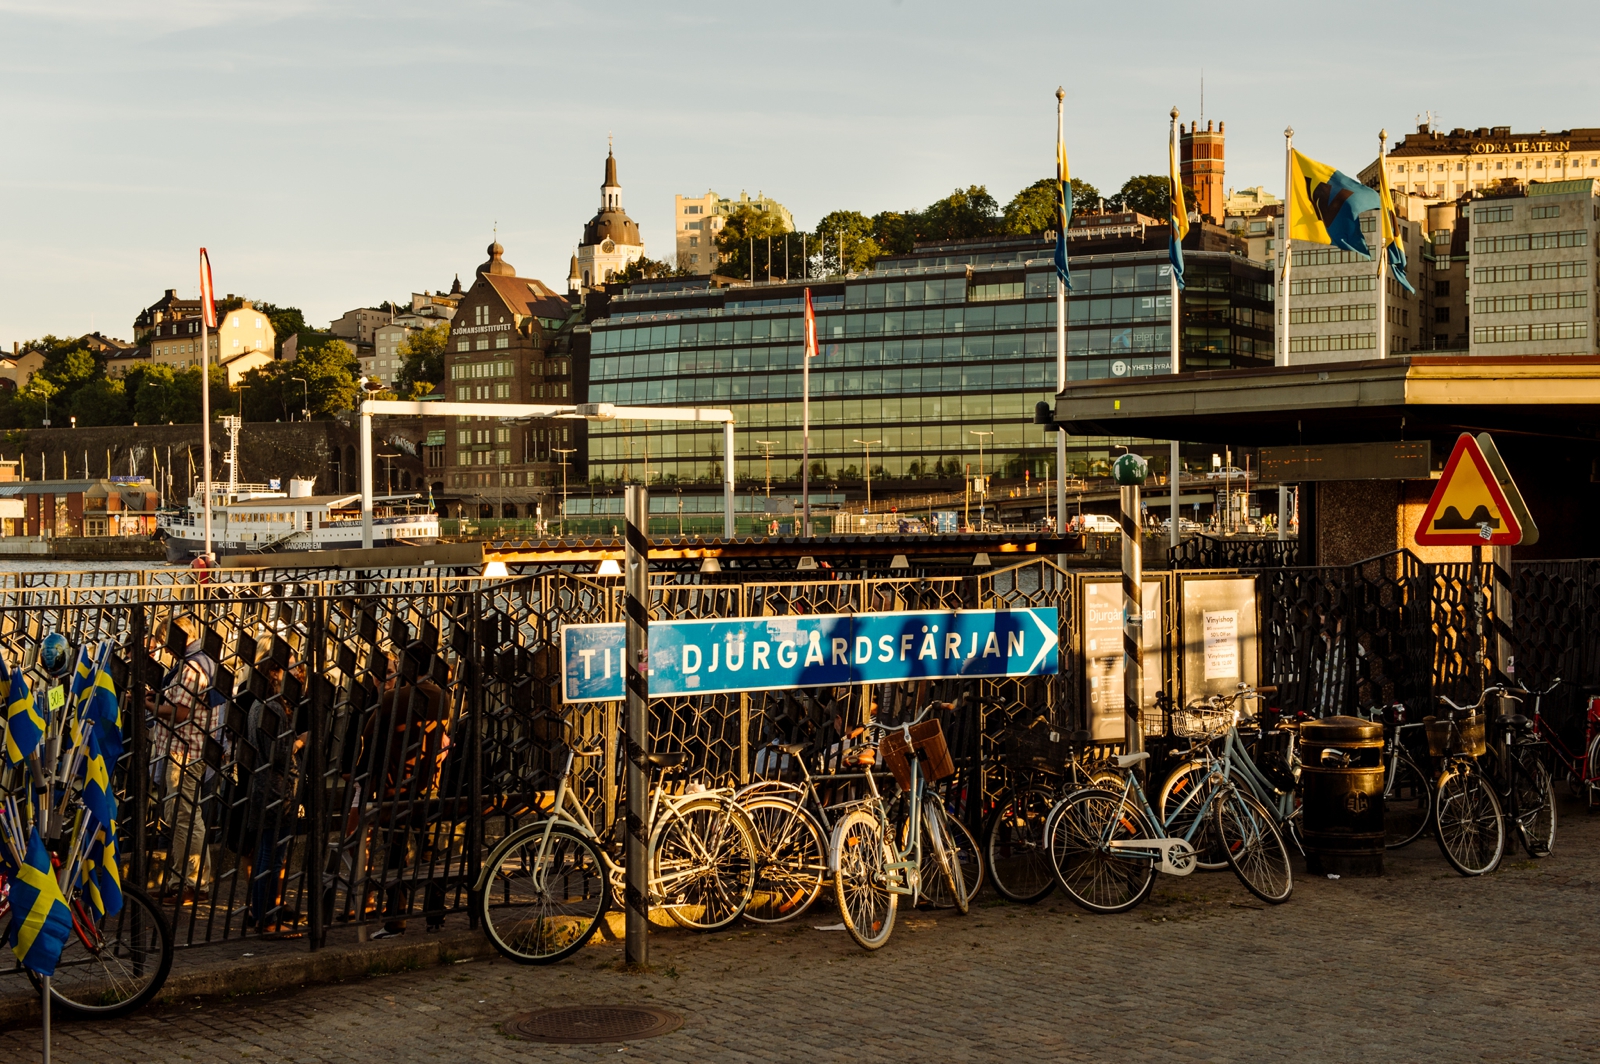 Bicycles in Stockholm